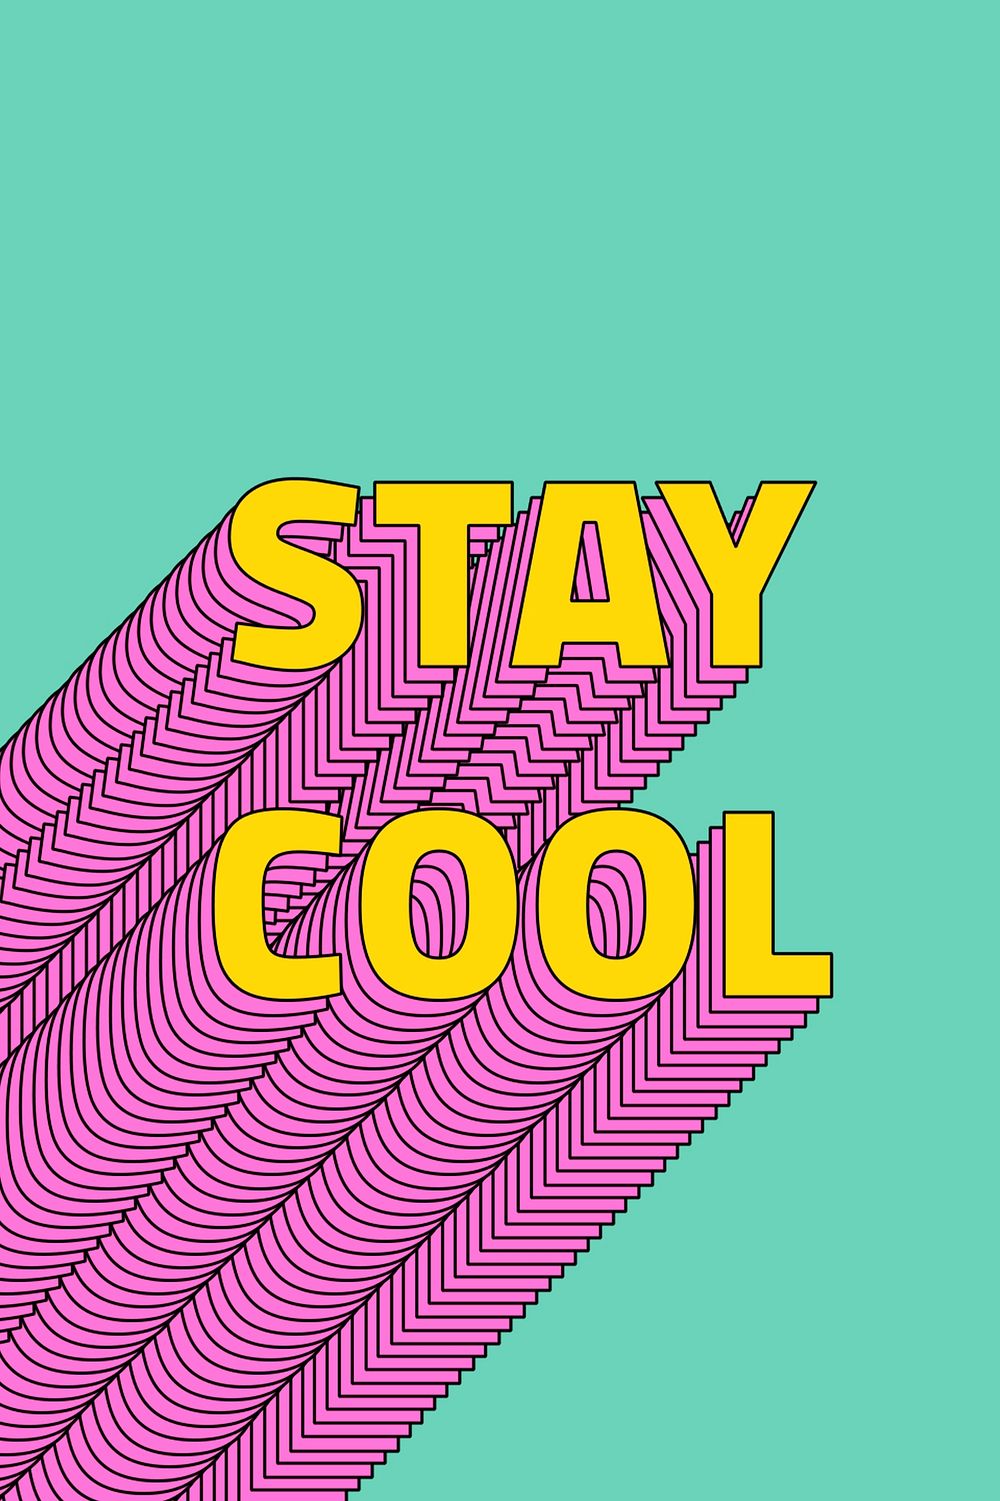 Stay cool layered text typography | Free Photo - rawpixel